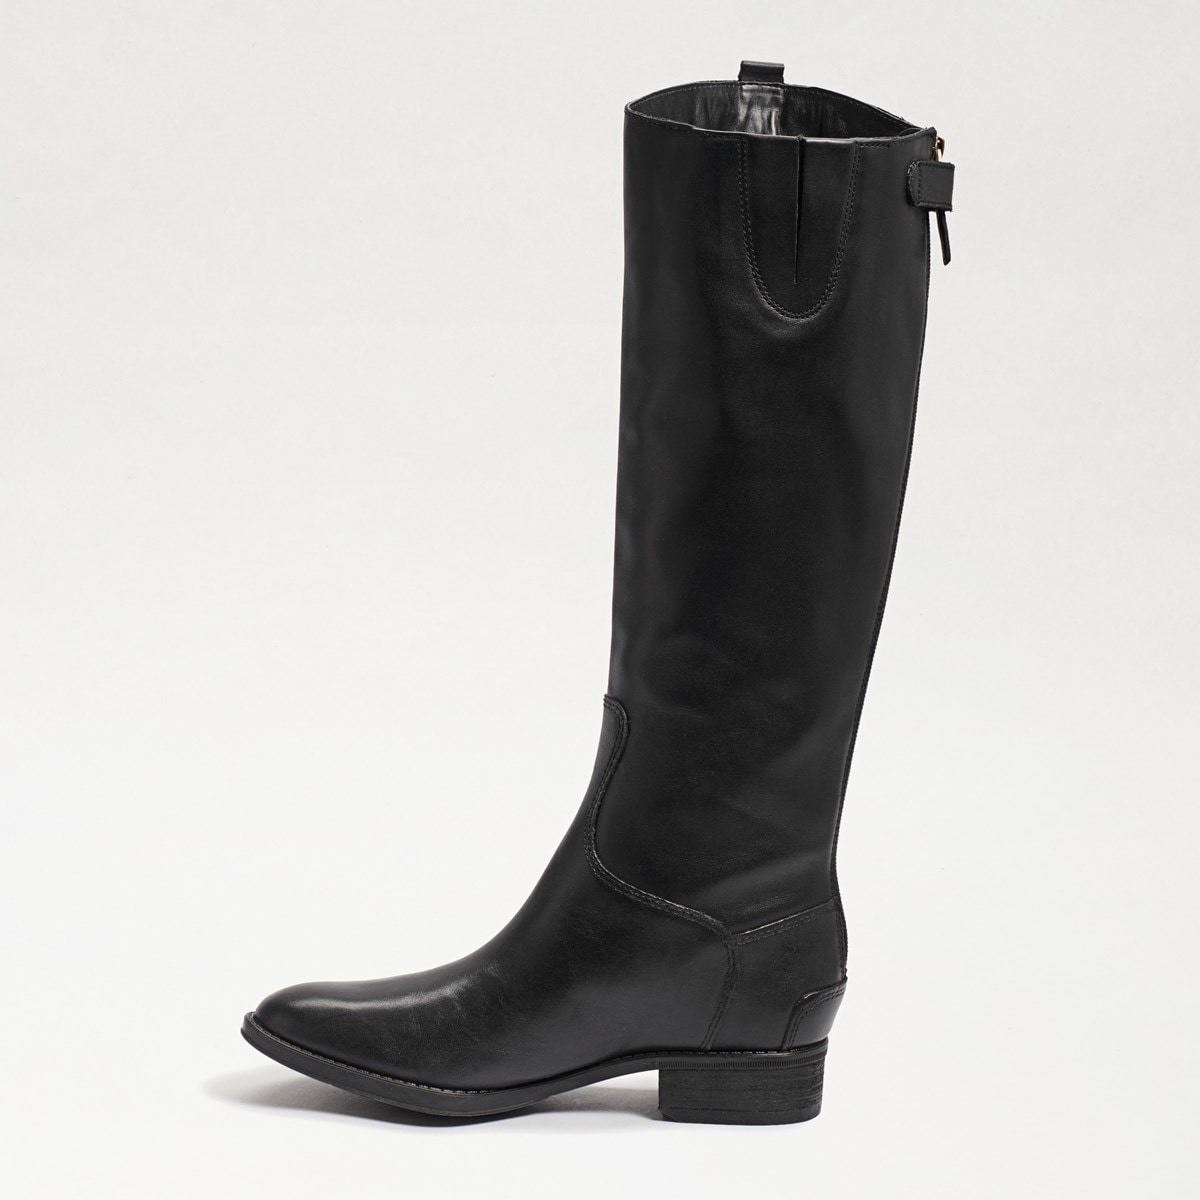 Buy > ladies riding boots wide calf > in stock